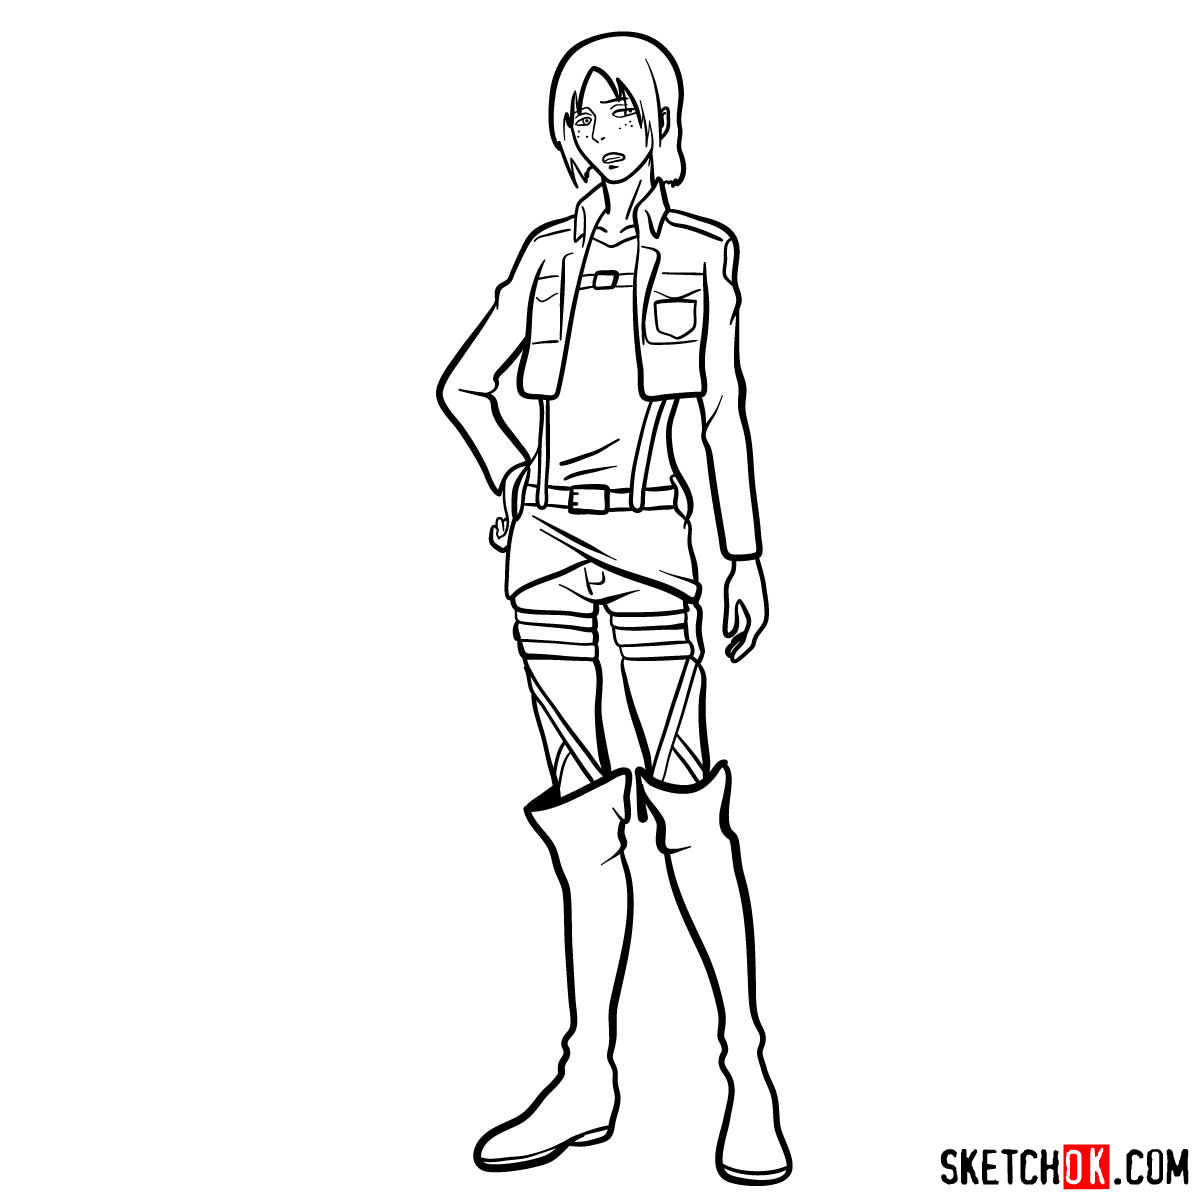 How to draw Ymir from Attack on Titan